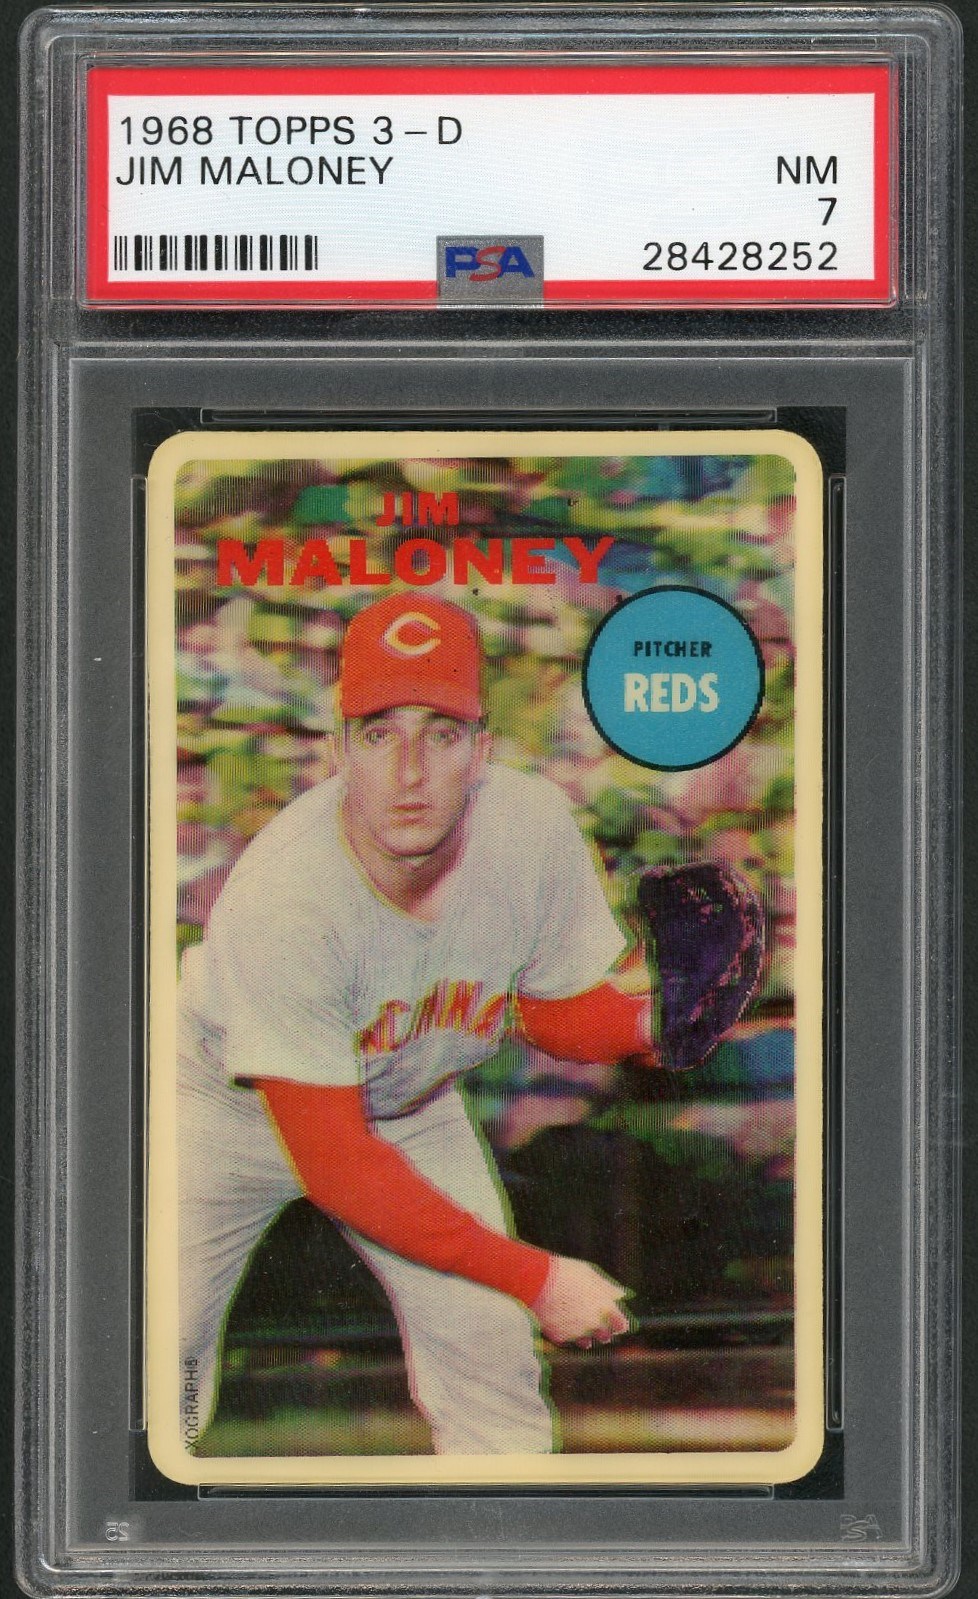 Baseball and Trading Cards - 1968 Topps 3-D Jim Maloney - PSA NM 7